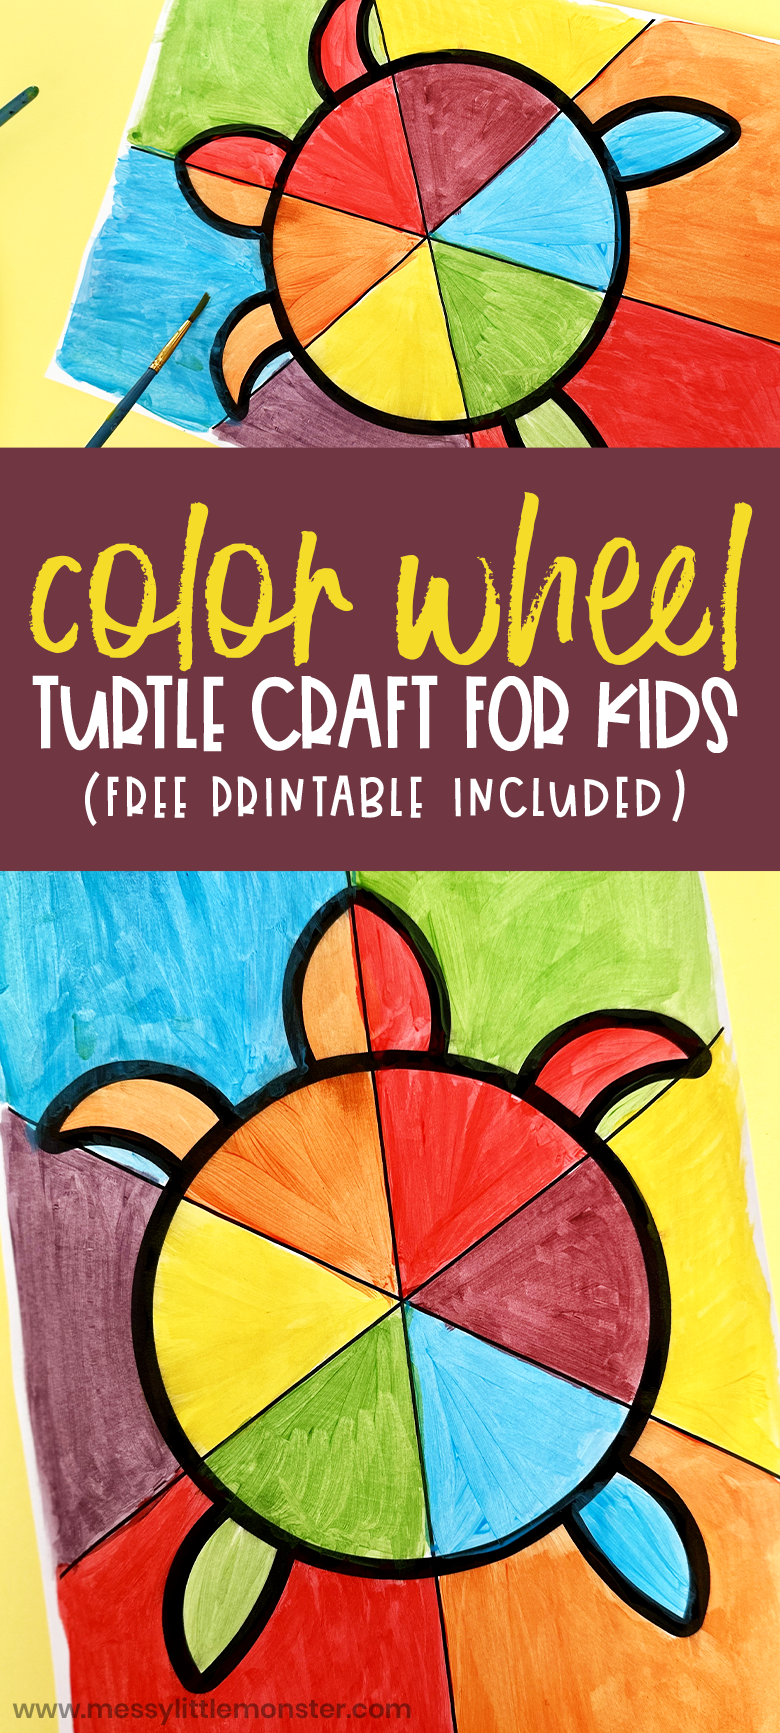 How to make a color wheel for kids. Use our free printable color wheel template to make this turtle craft